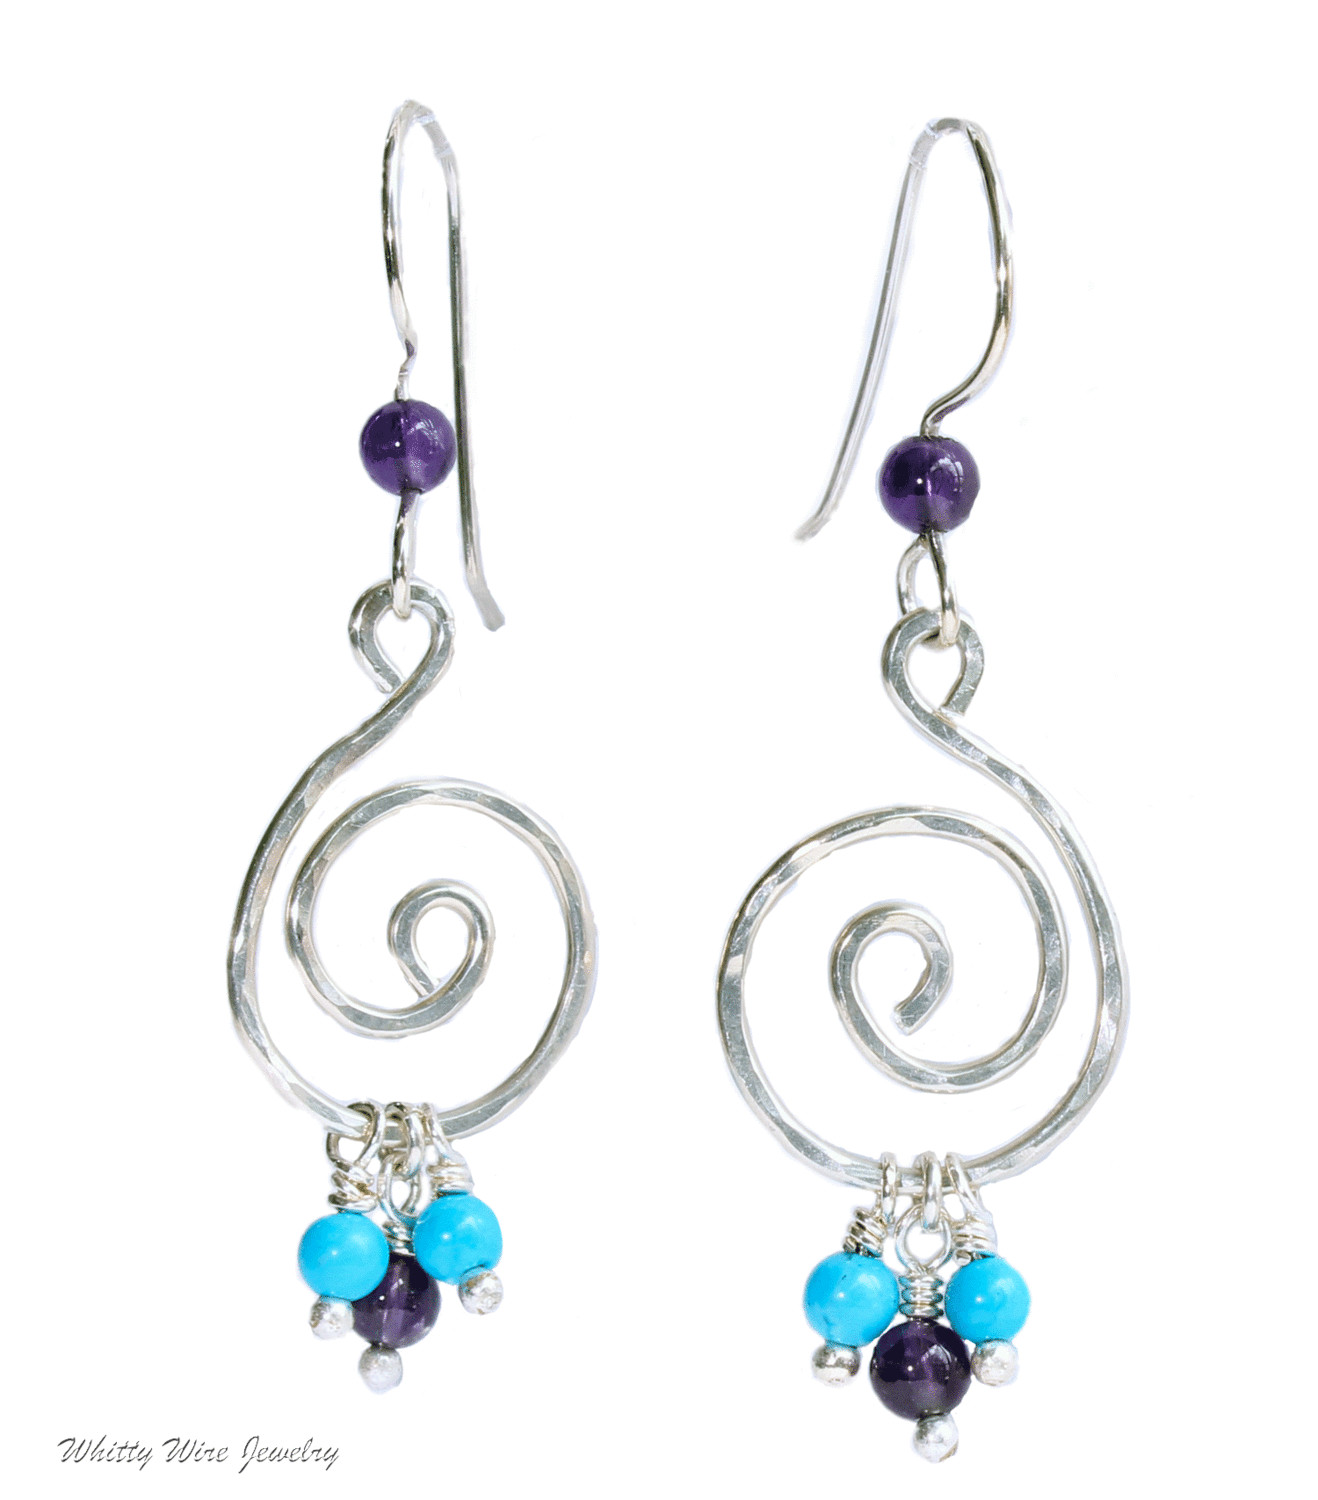 Sterling Silver Celtic Swirl earrings with Turquoise and Amethyst